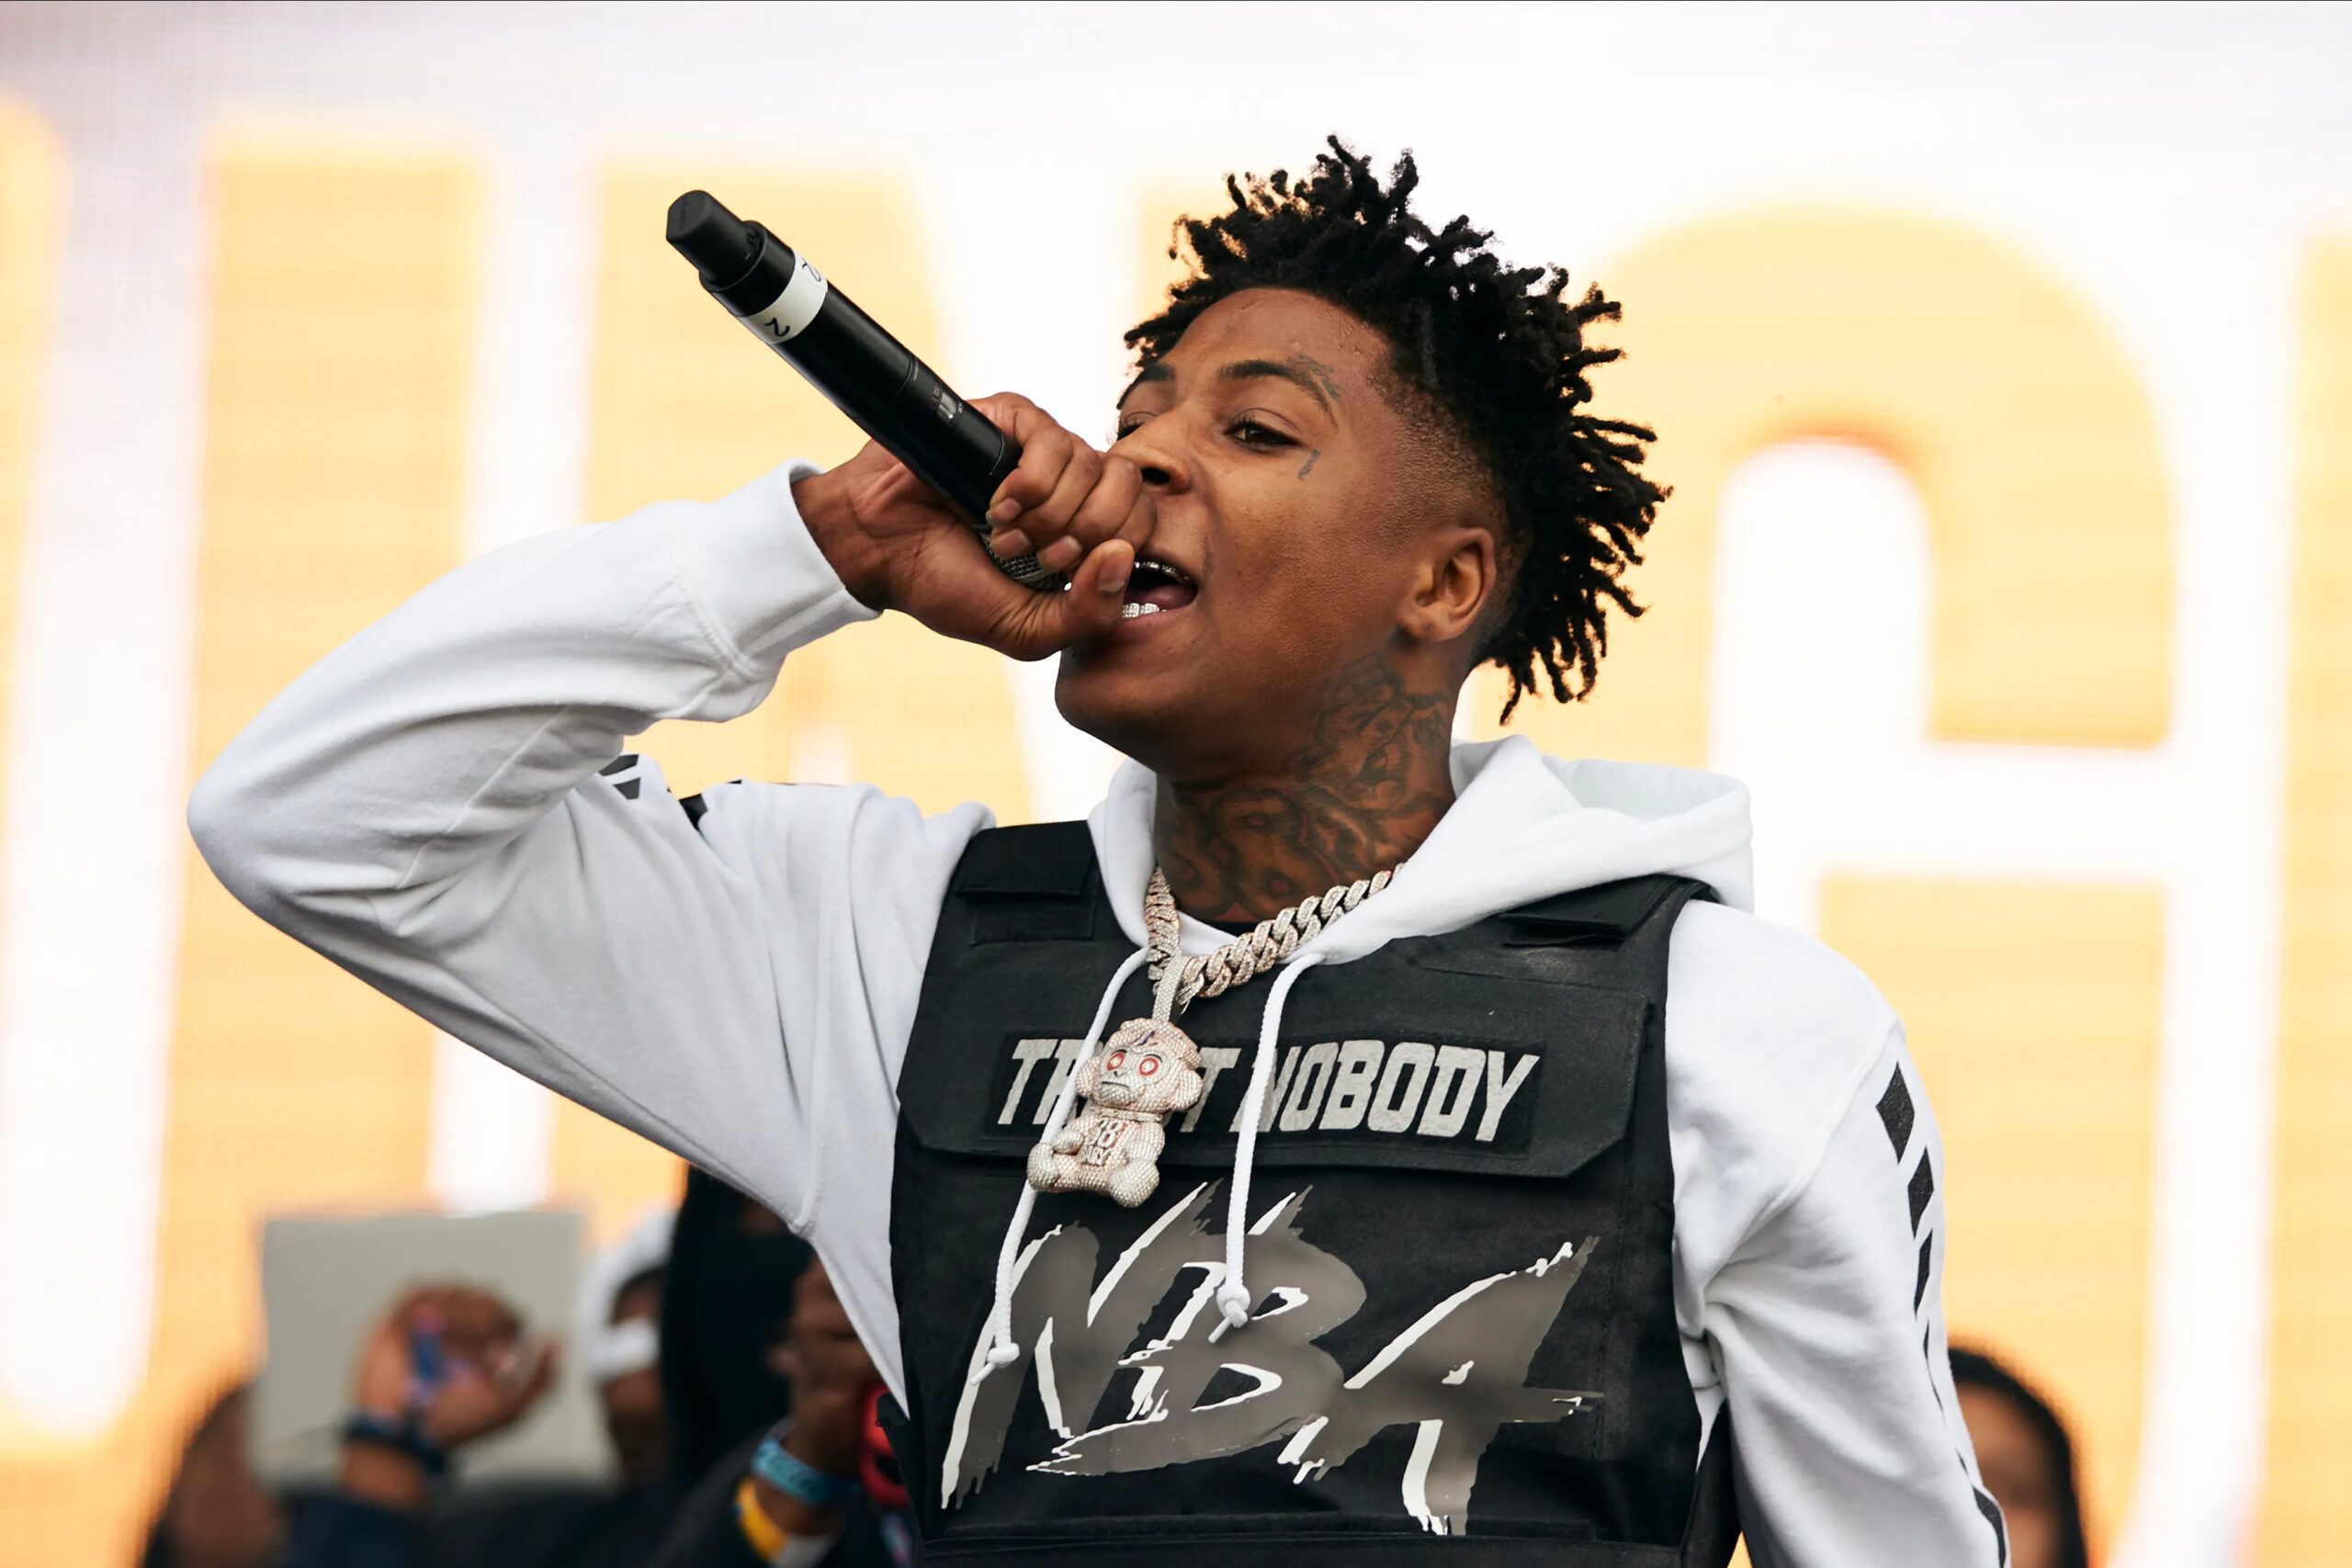 A Nba Youngboy Debuts His New Project, "Lost Files"